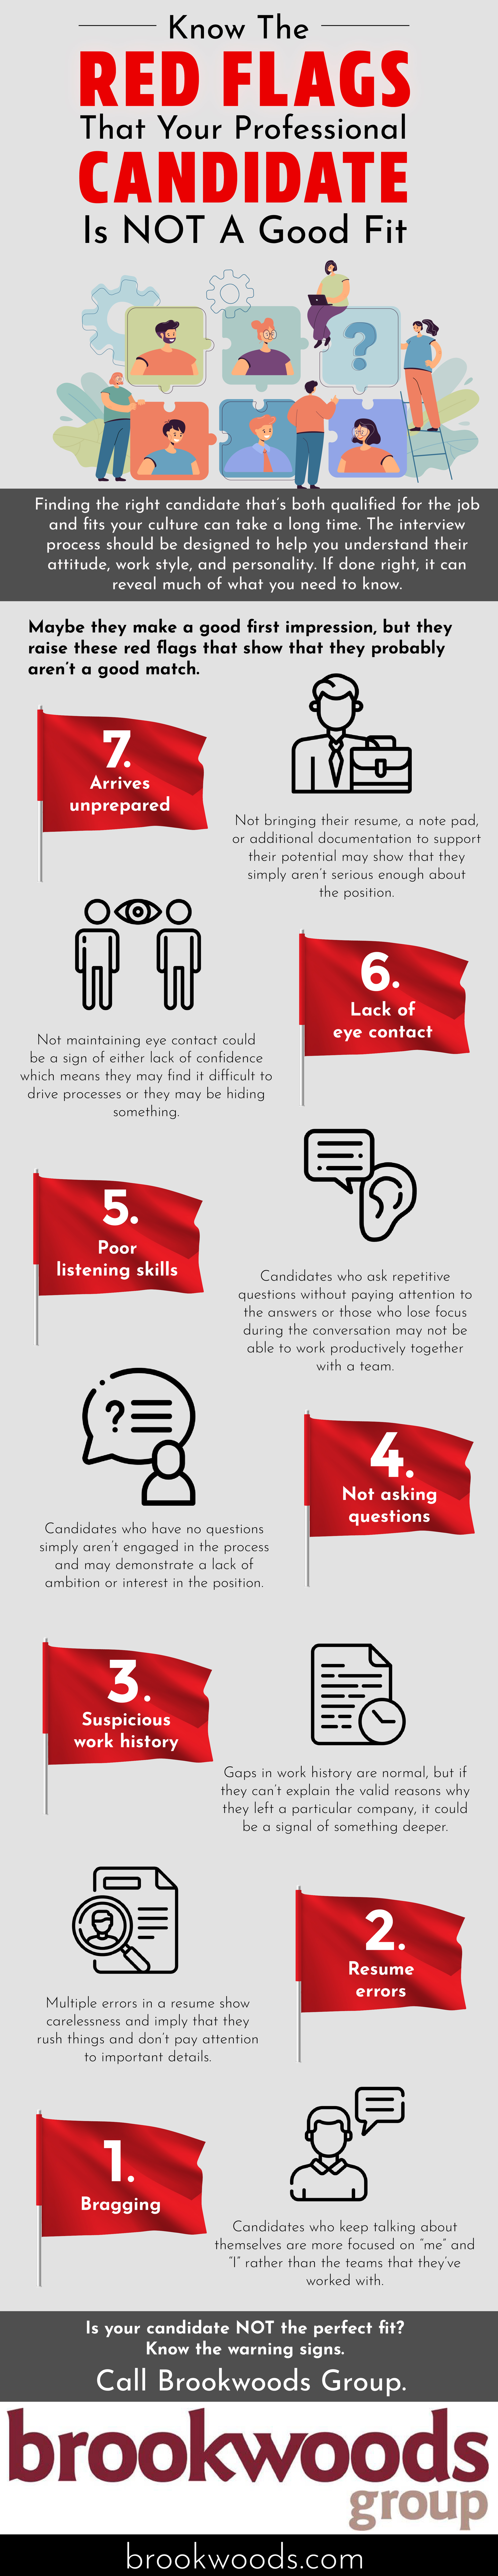 know the red flags that your professional candidate is not a good fit